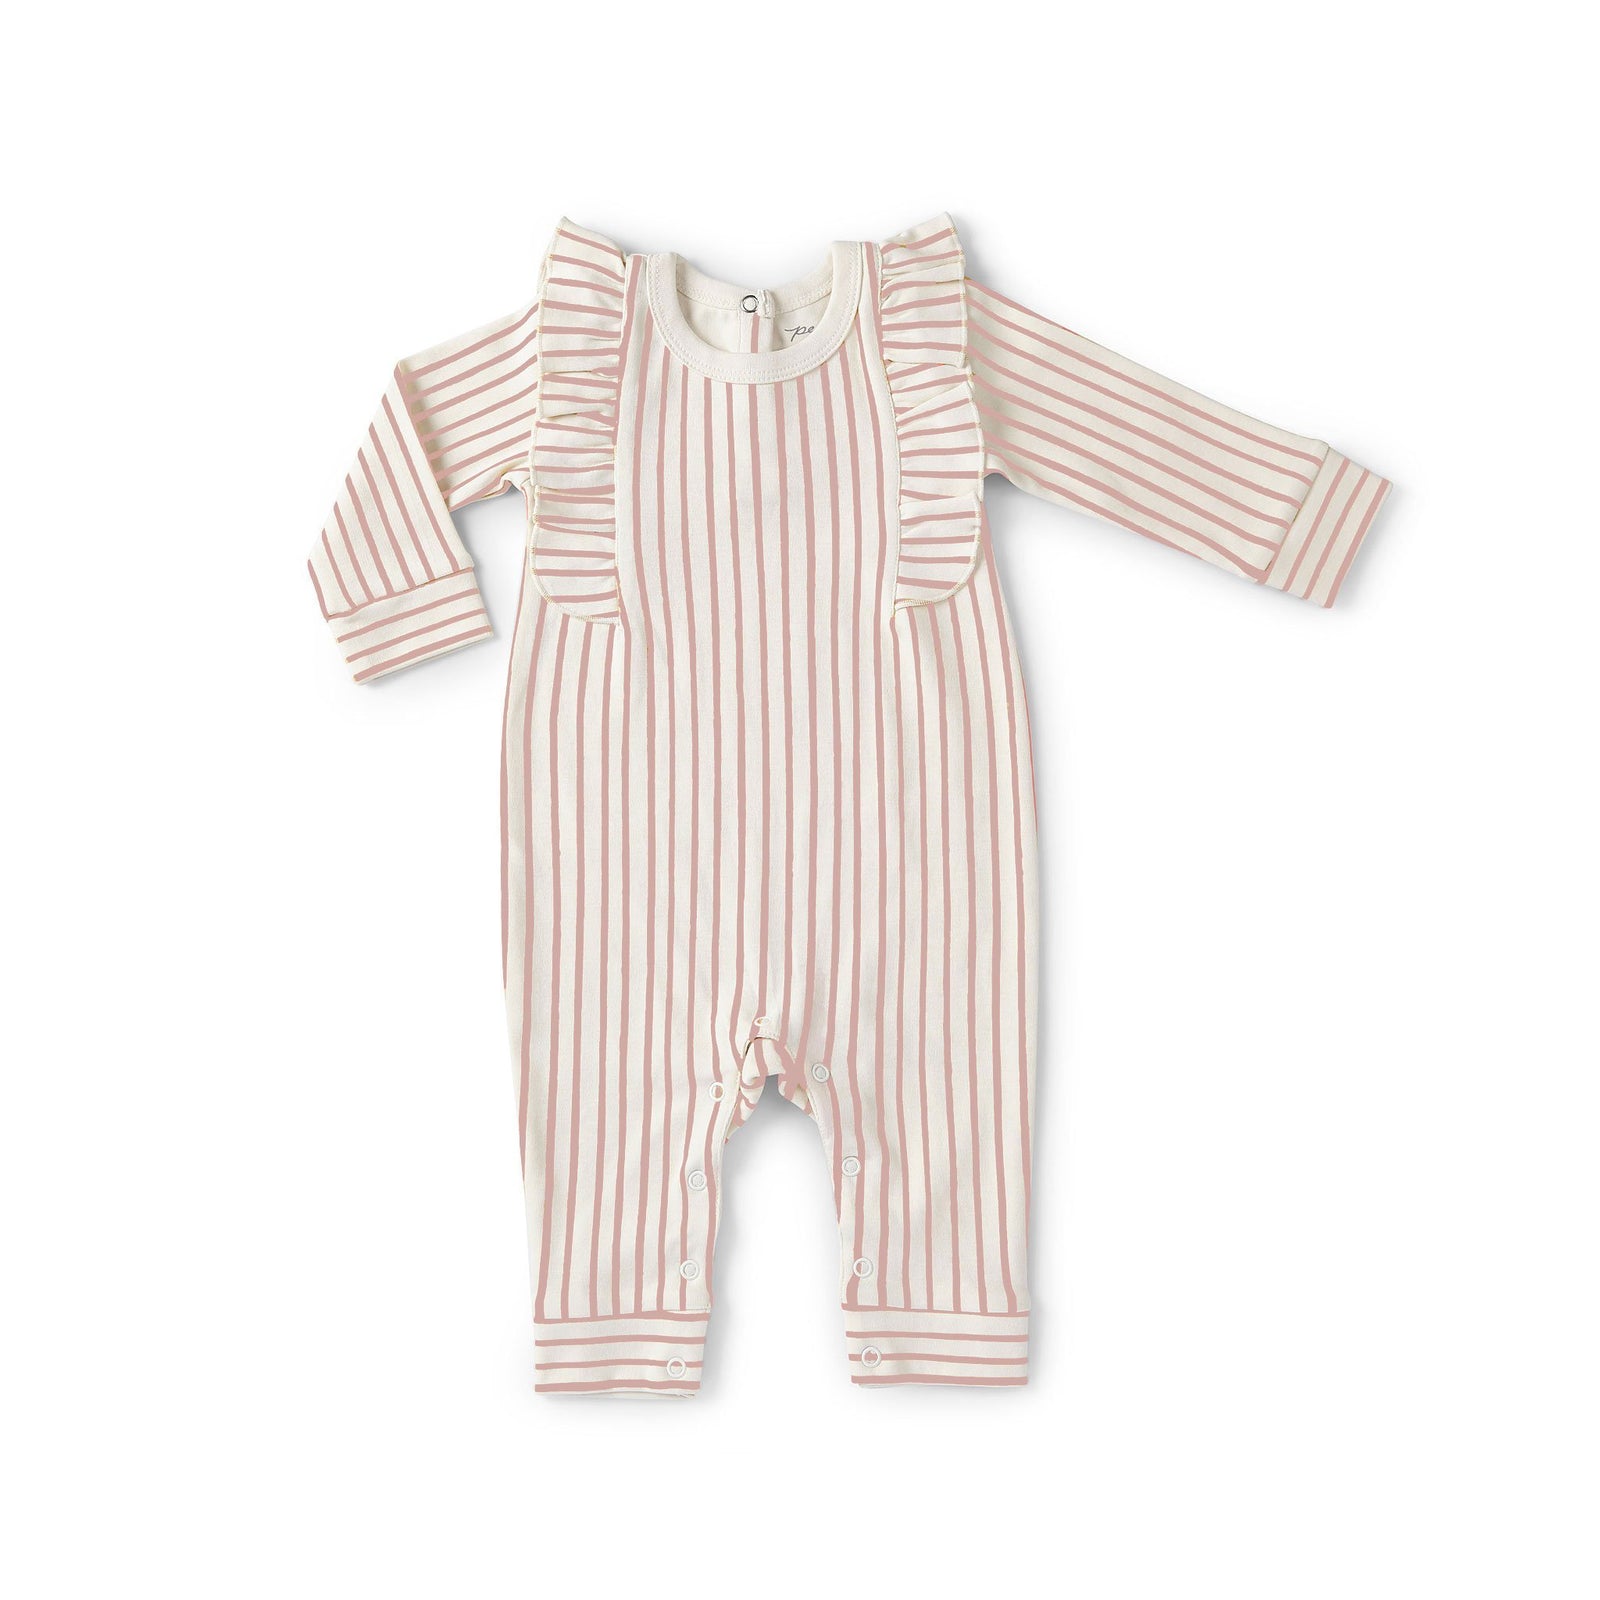 Pehr Long Sleeve Stripes Away Dark Pink w/Ruffle Romper. Certified organic cotton. White with pink stripes and ruffles on the collar.